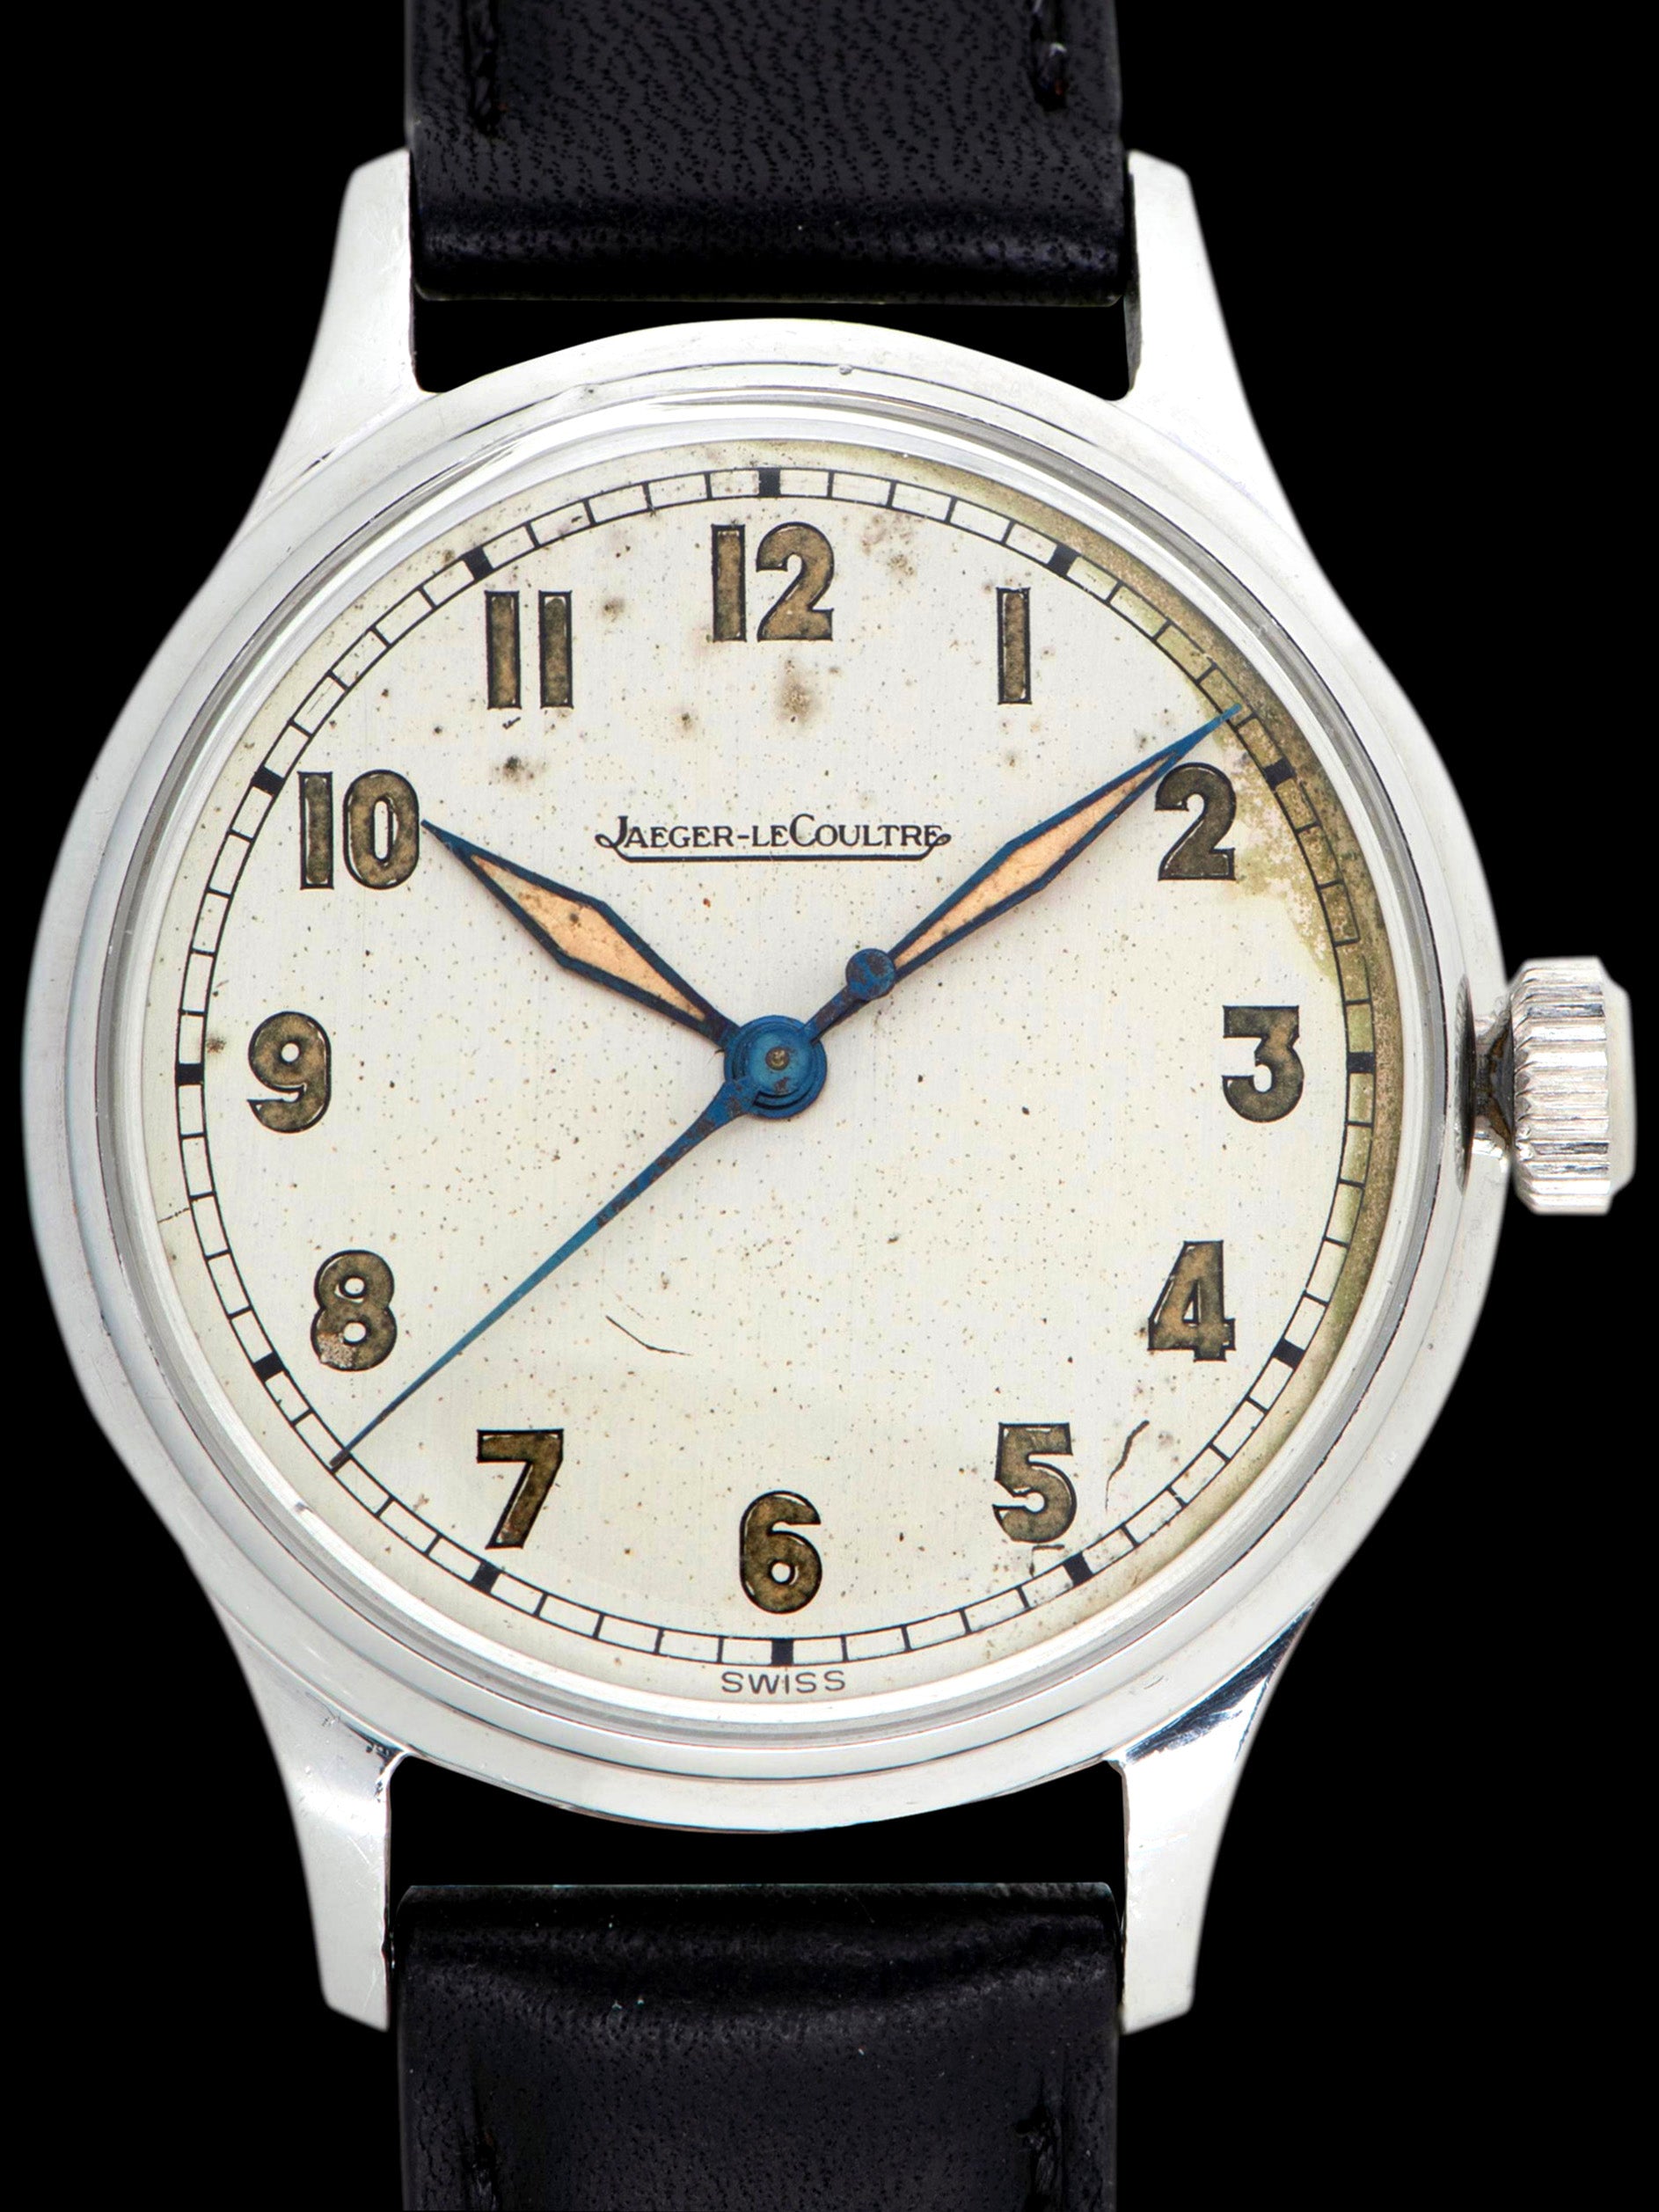 1940s Jaeger-LeCoultre Military-Style Watch "Cal. P478"